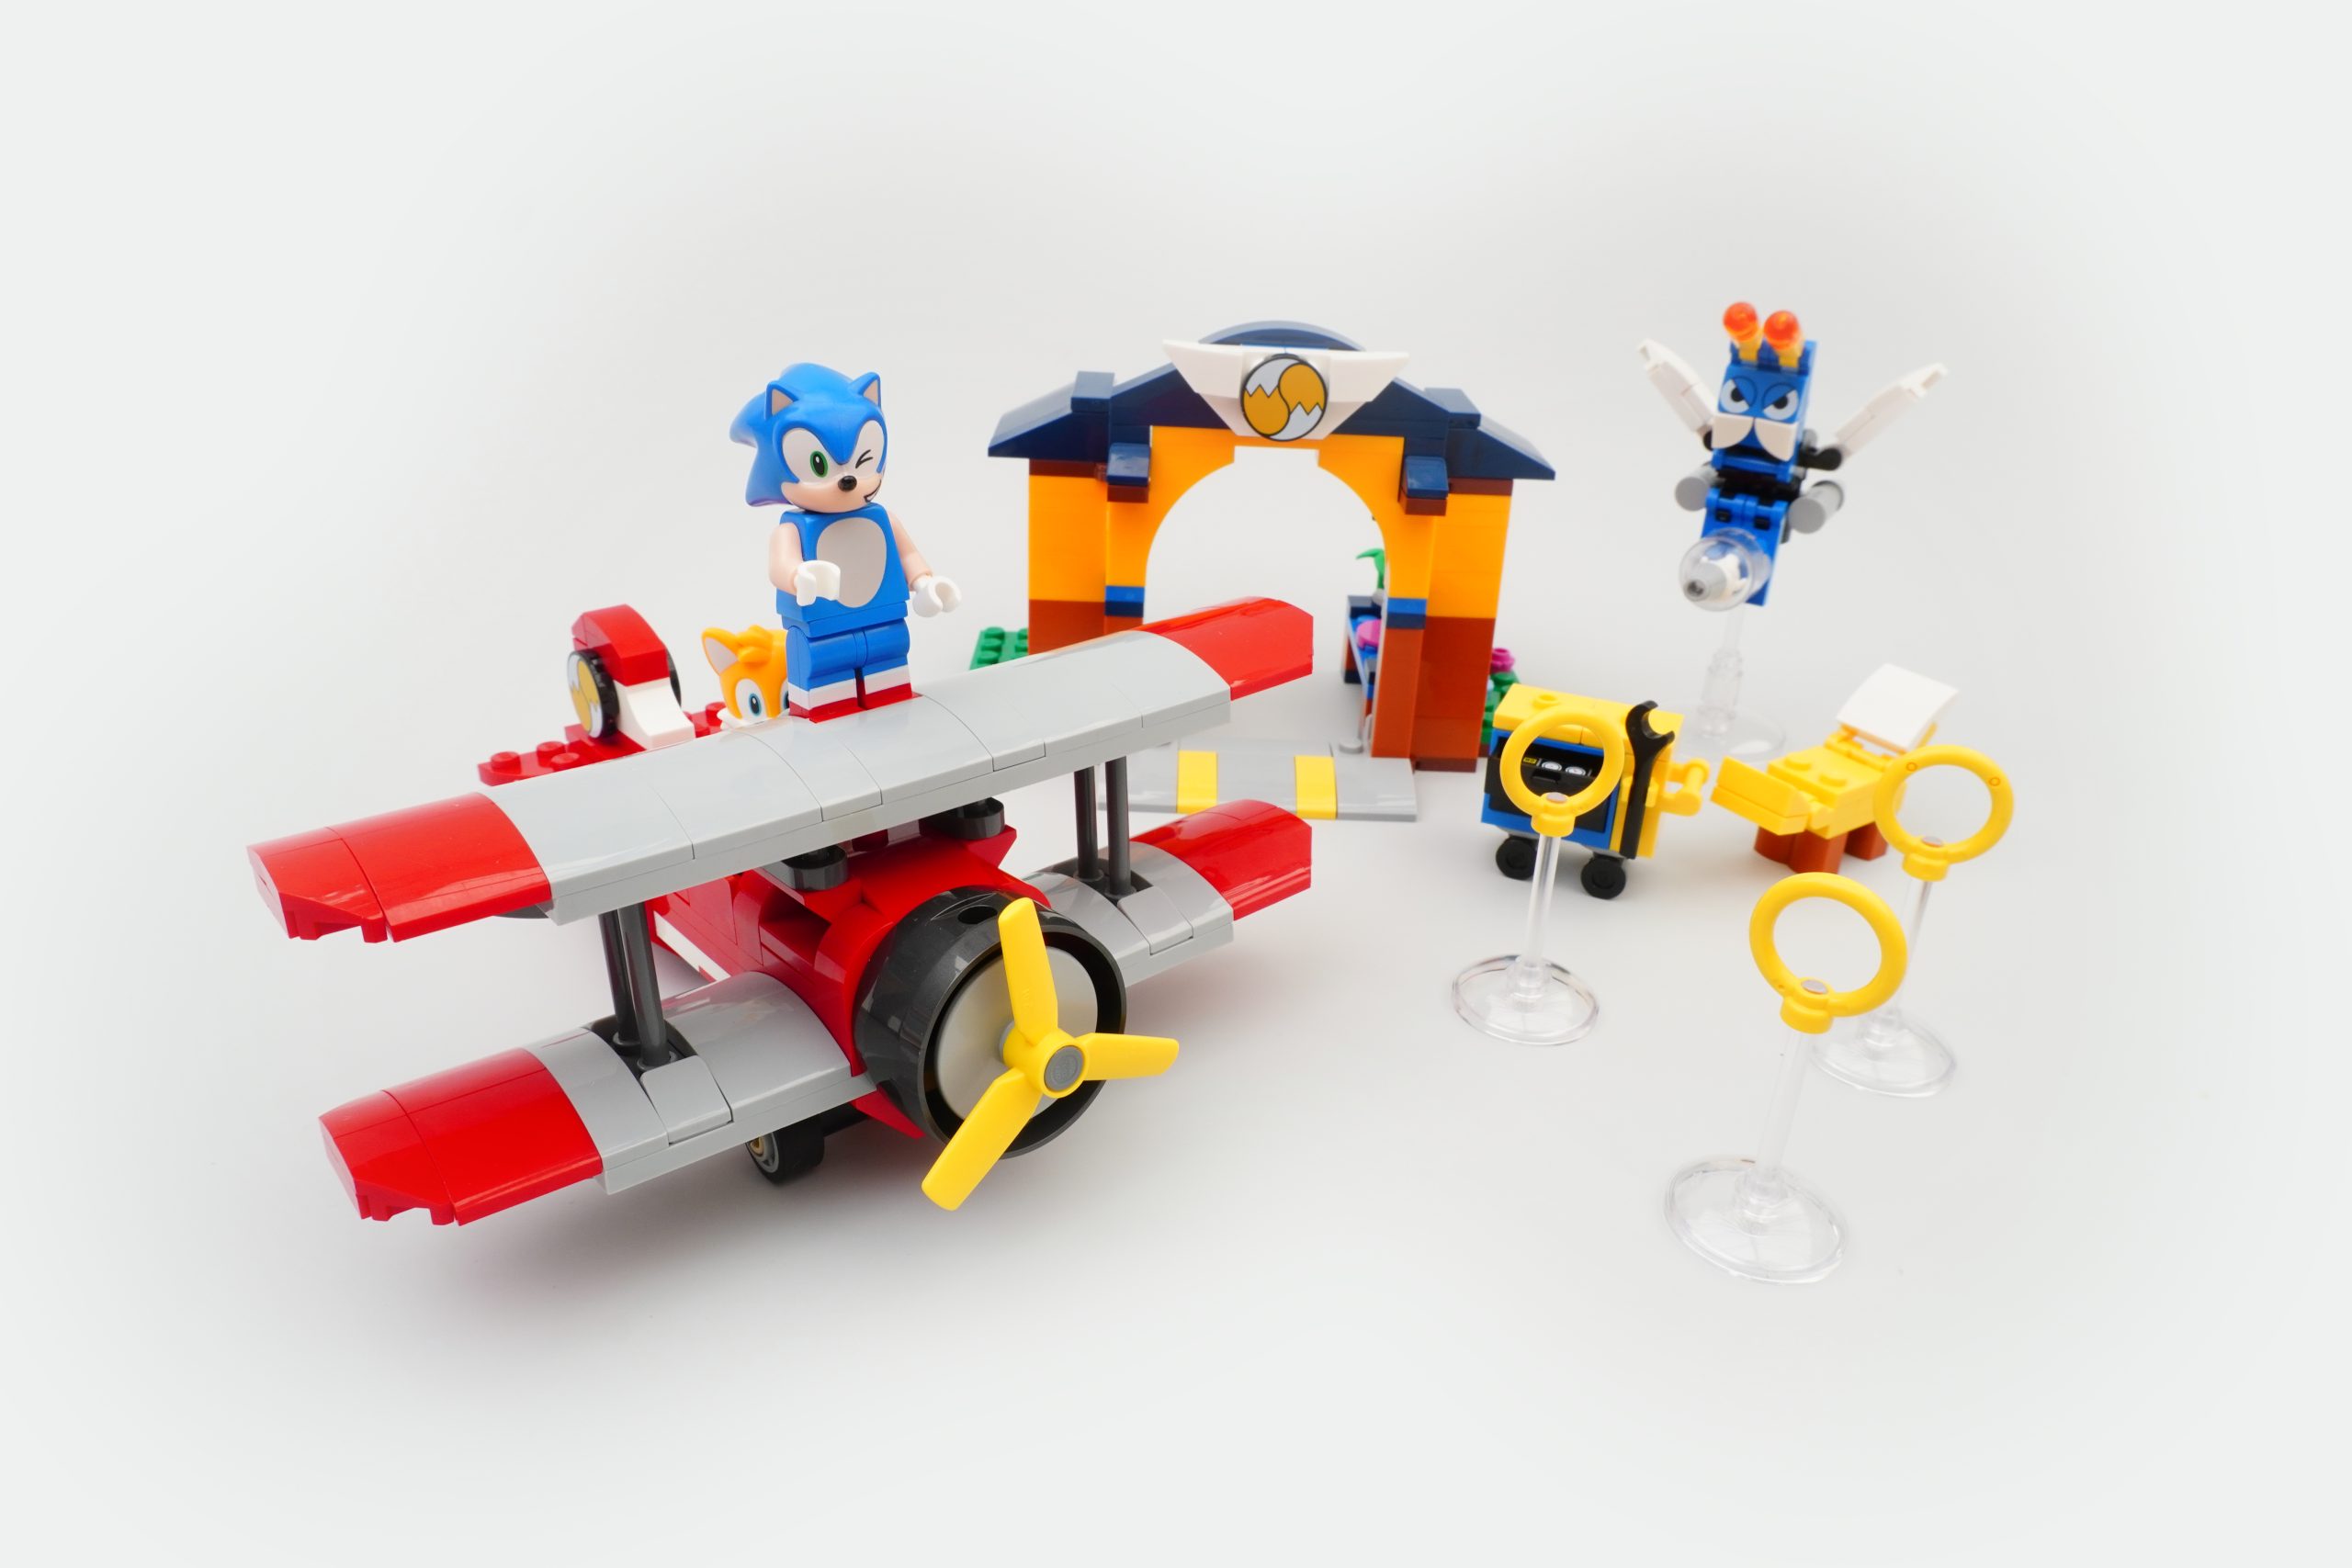 A Sonic The Hedgehog Lego Set Is Speeding Into Production - GameSpot